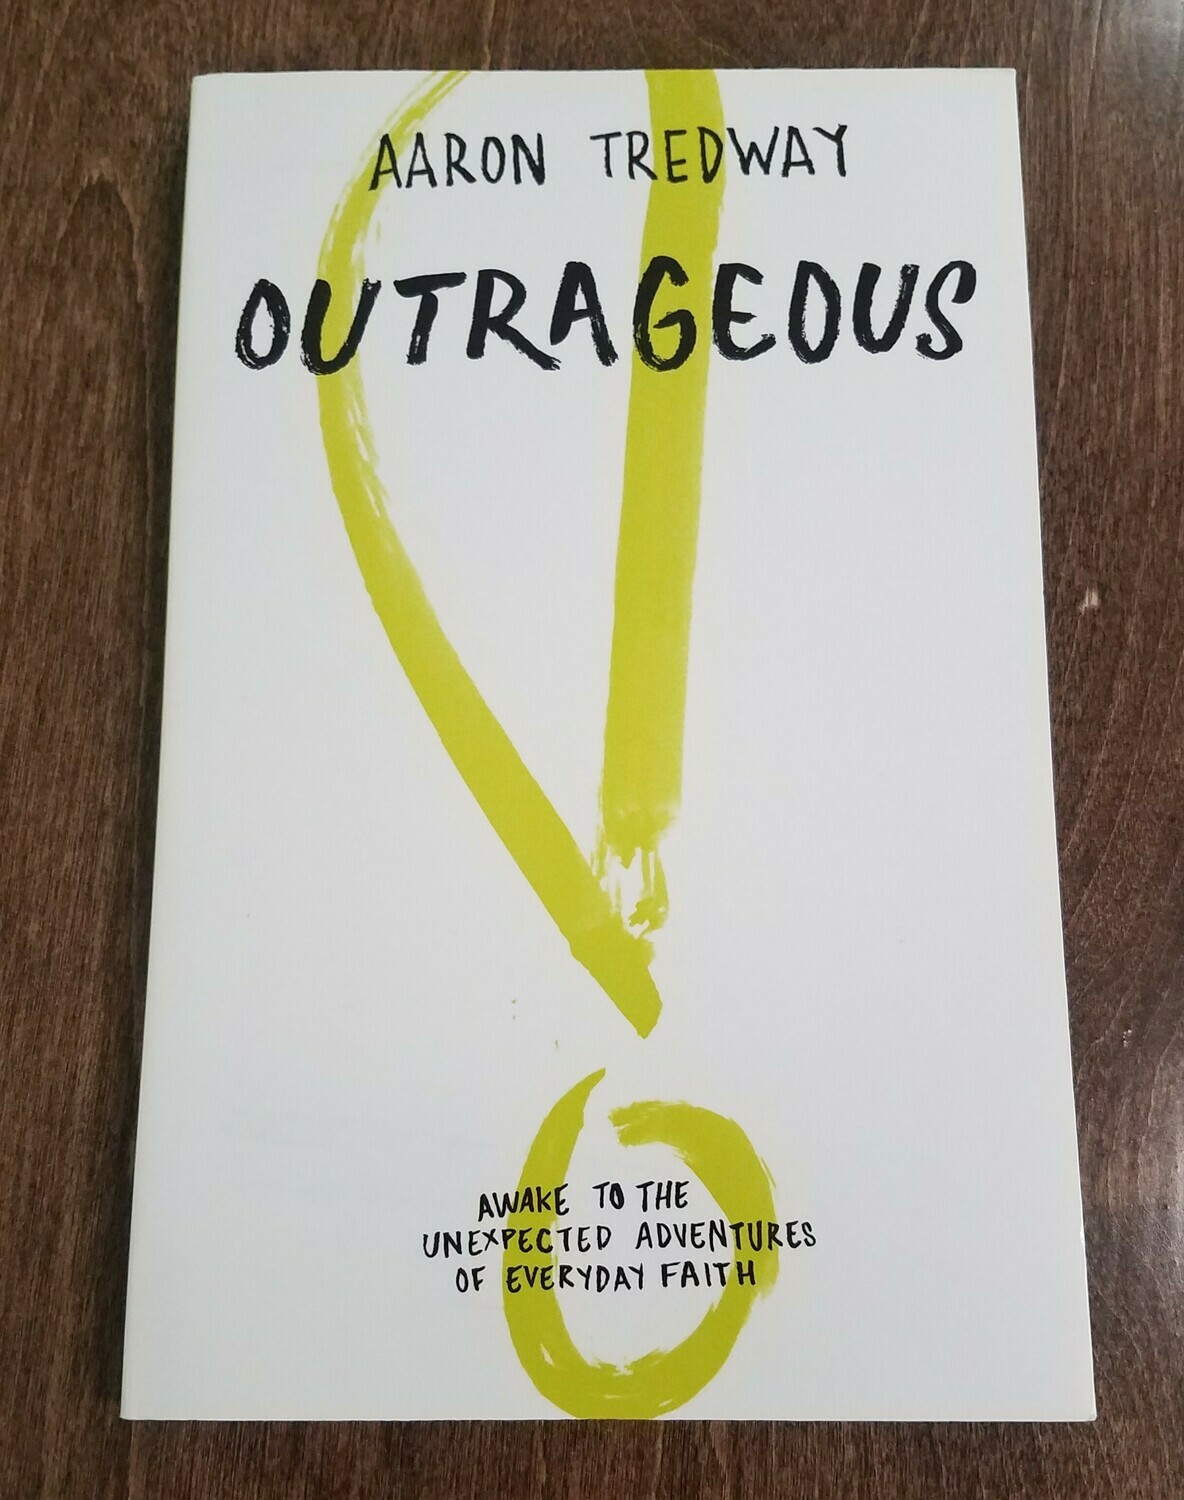 Outrageous by Aaron Tredway